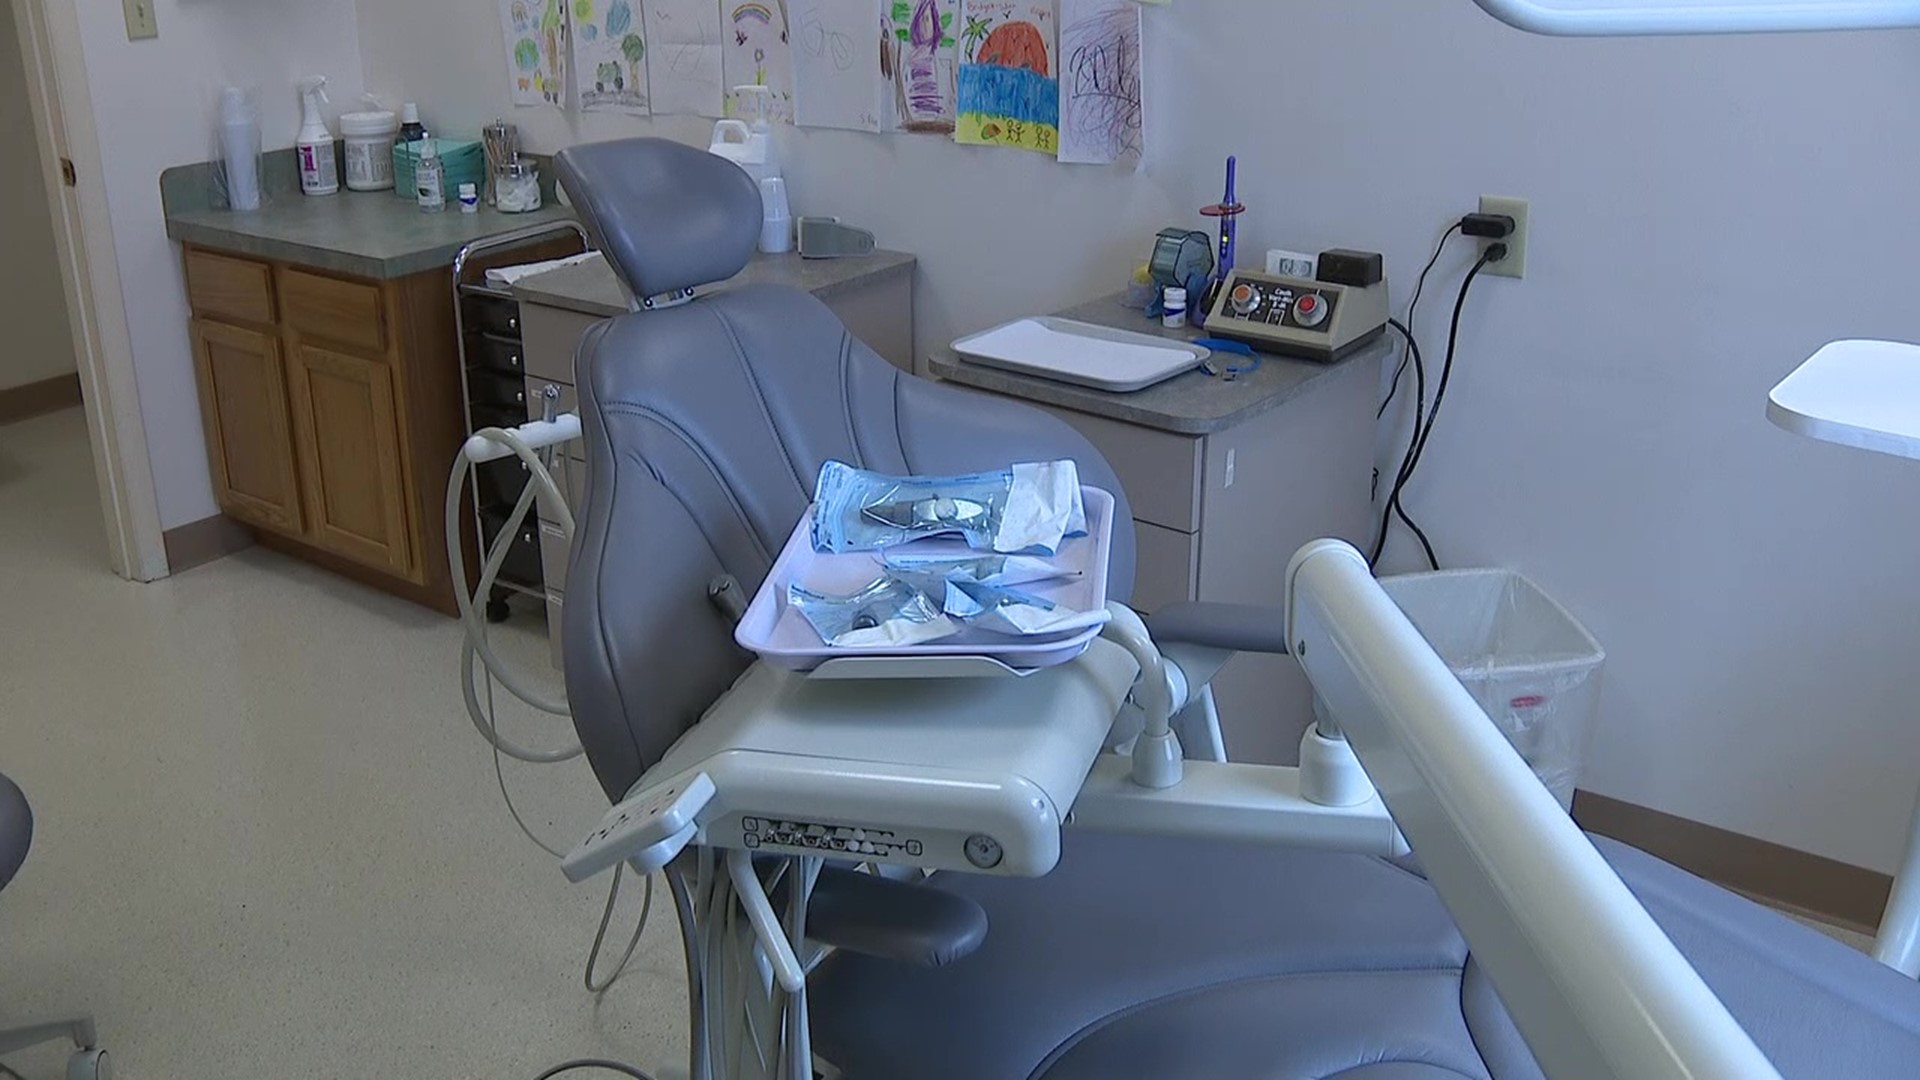 Dentists in Pennsylvania are currently only allowed to see patients on an emergency basis, making things difficult for both dentists and their patients.